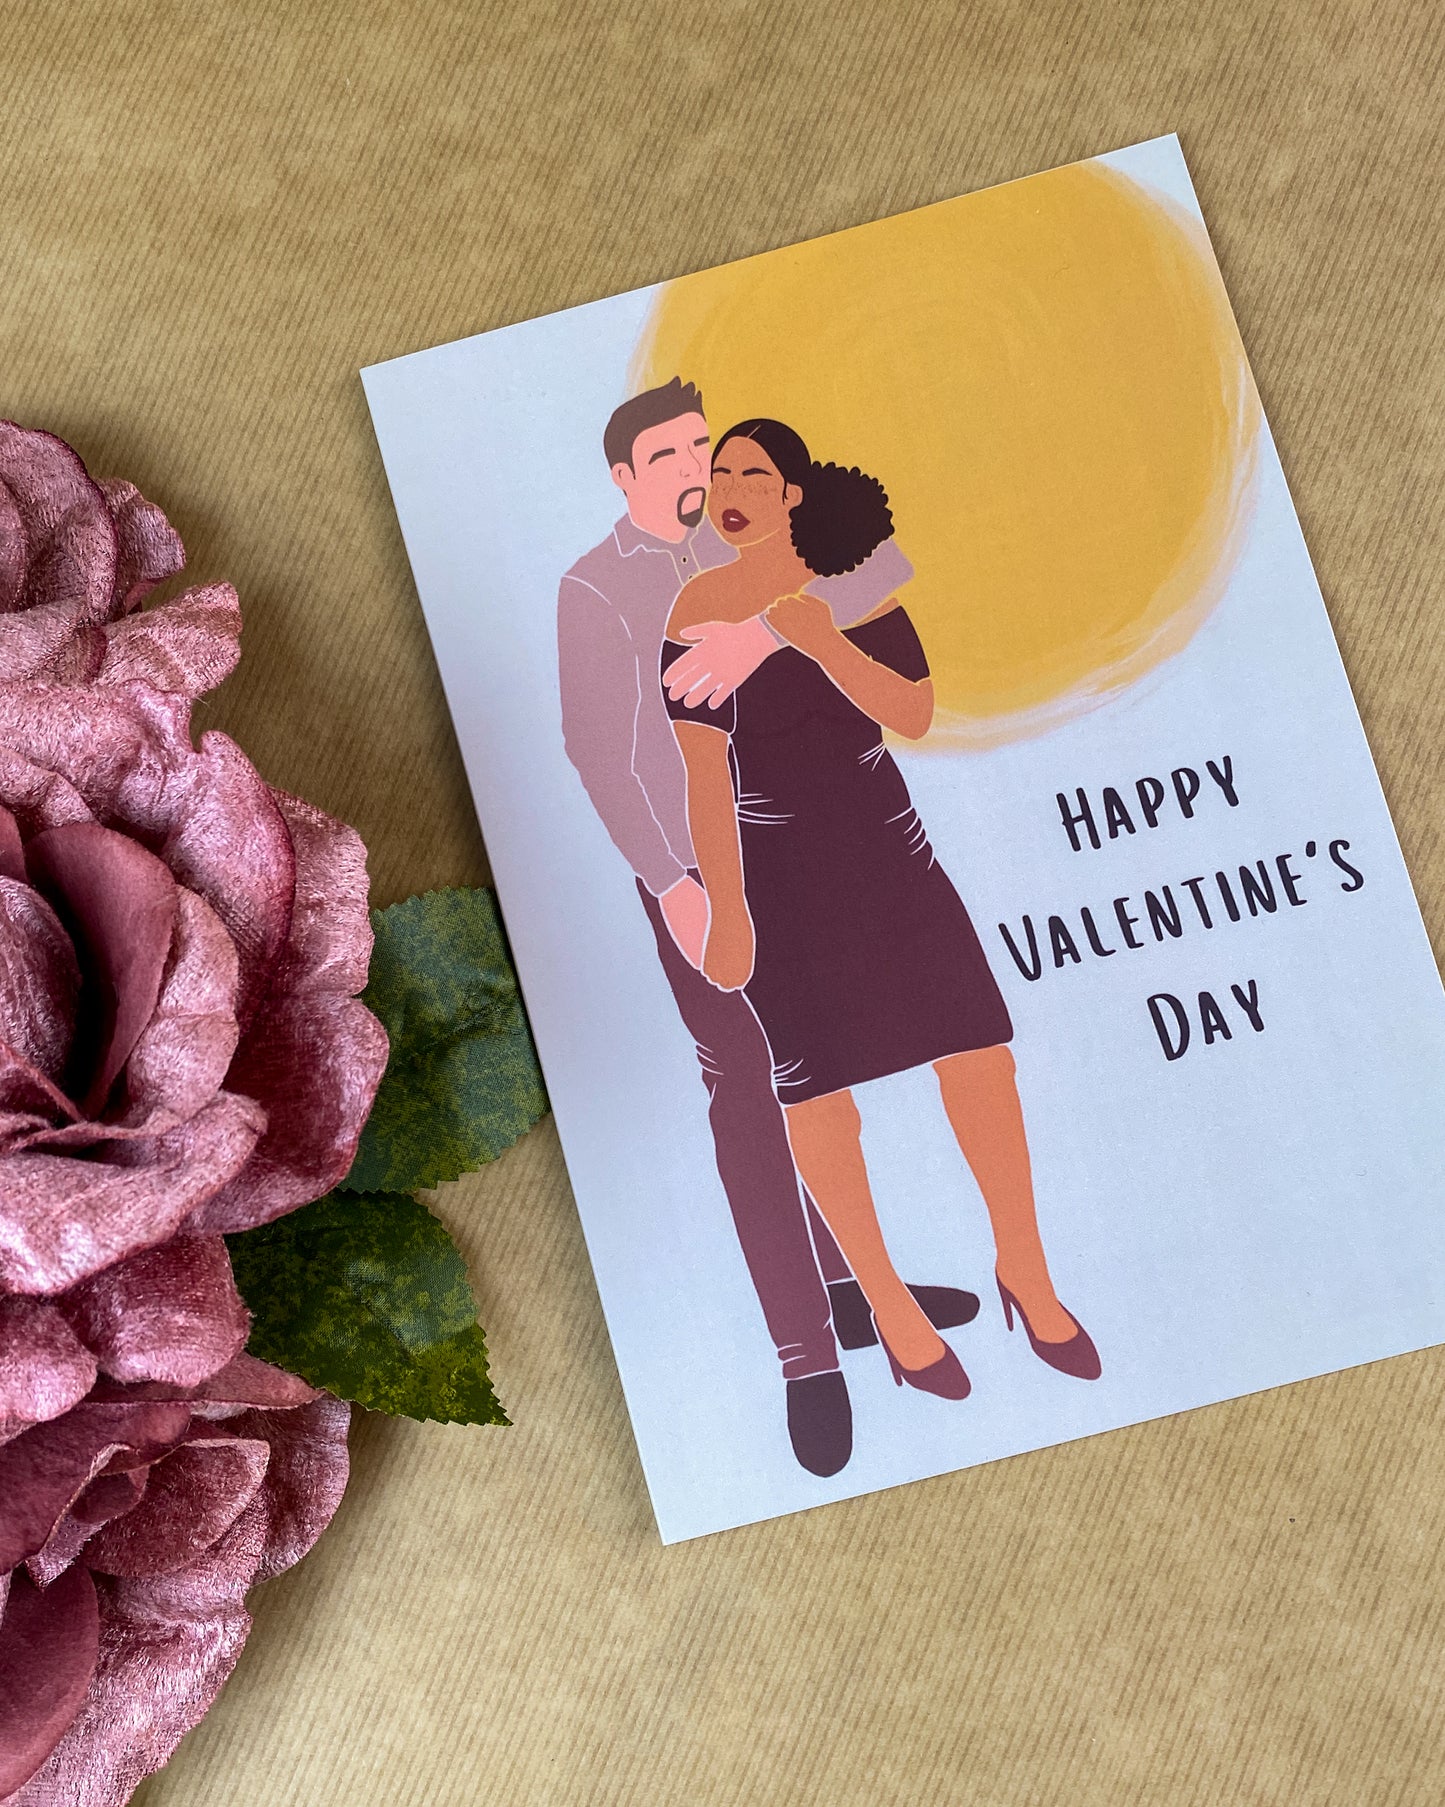 Embracing Lovers / Interracial Valentines Day Greetings Card